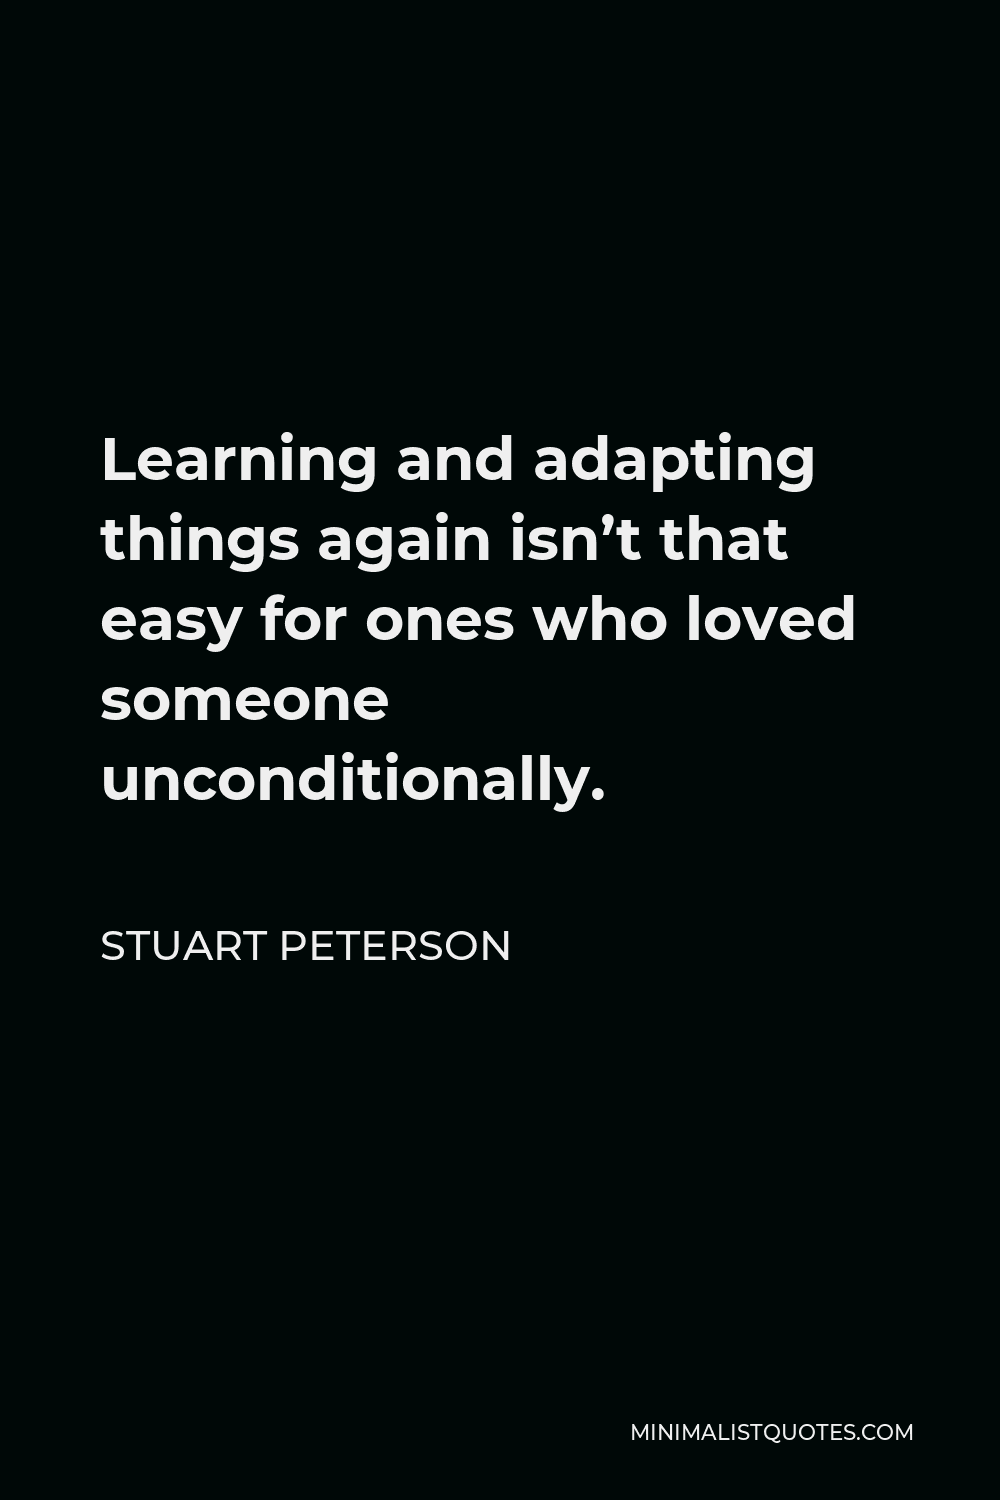 Stuart Peterson Quote - Learning and adapting things again isn’t that easy for ones who loved someone unconditionally.